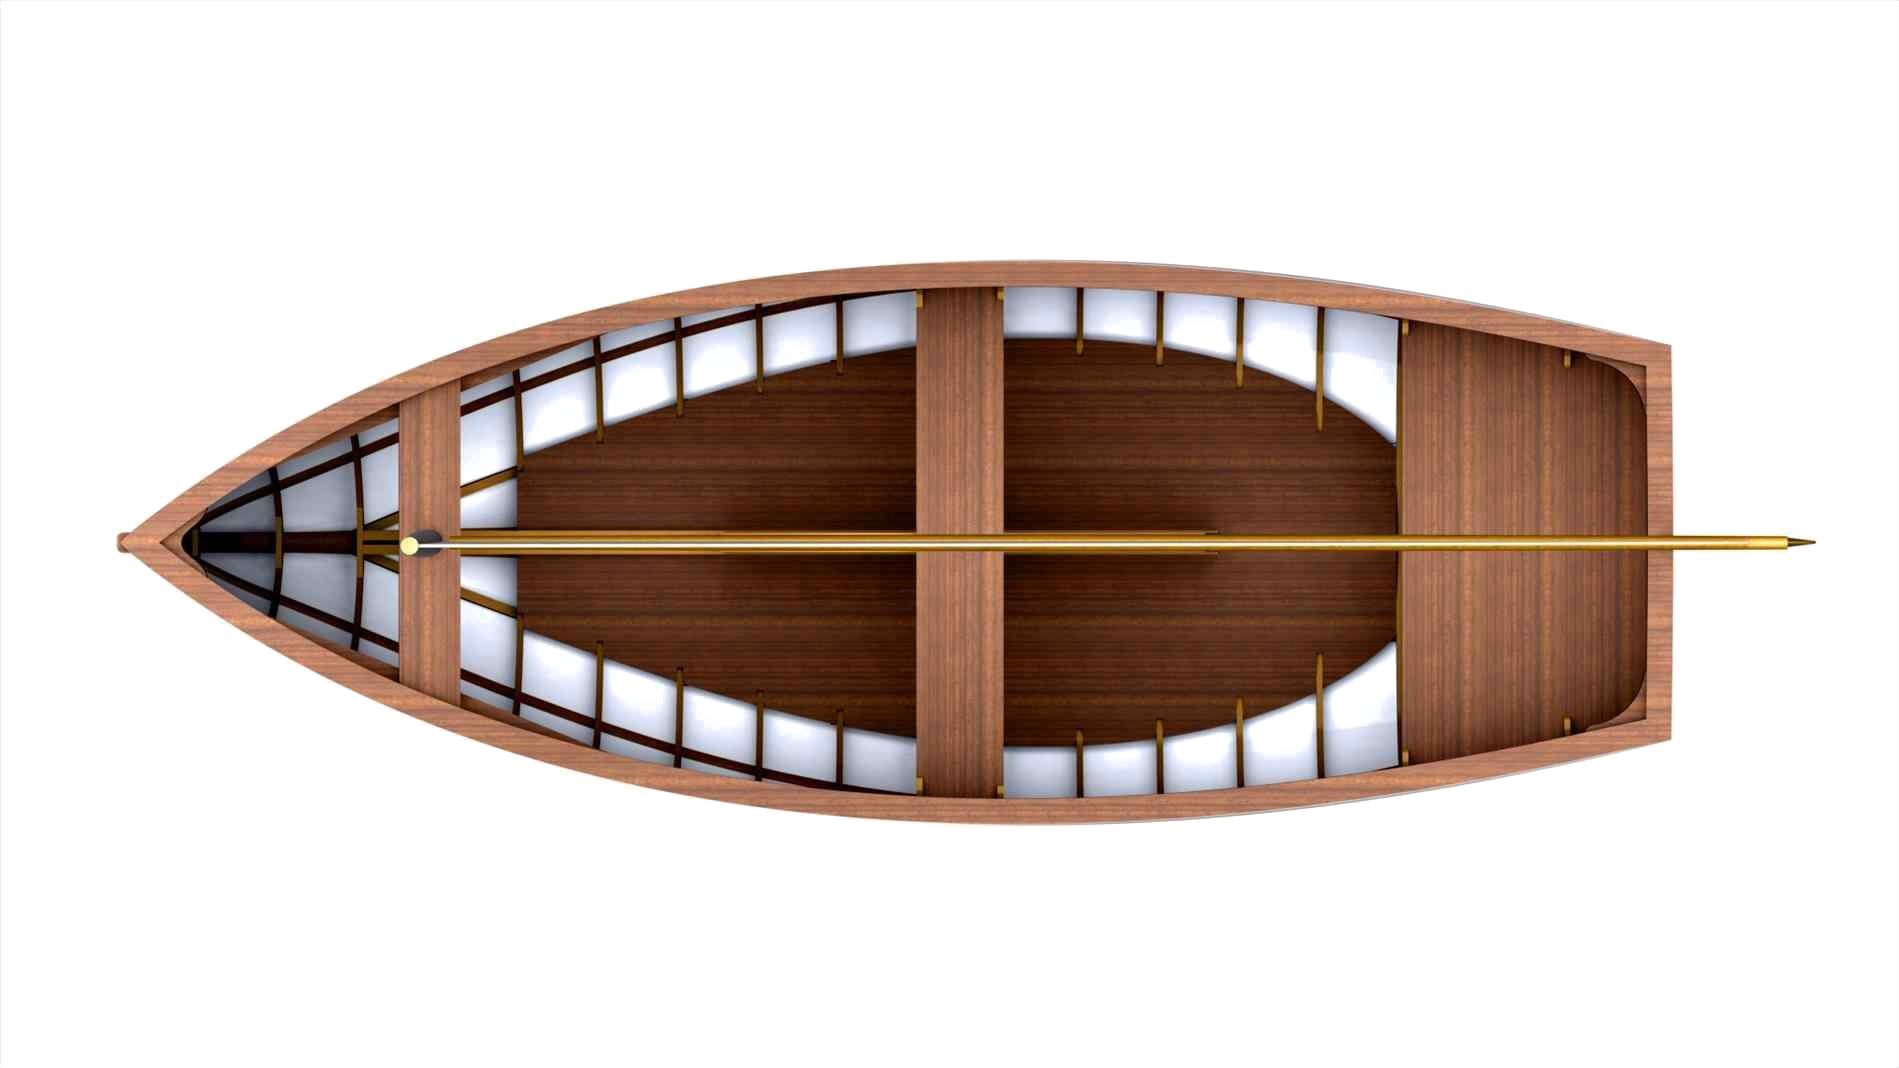 Wood Boat Free Png Image Wooden Boat Top View Png Clipart Large